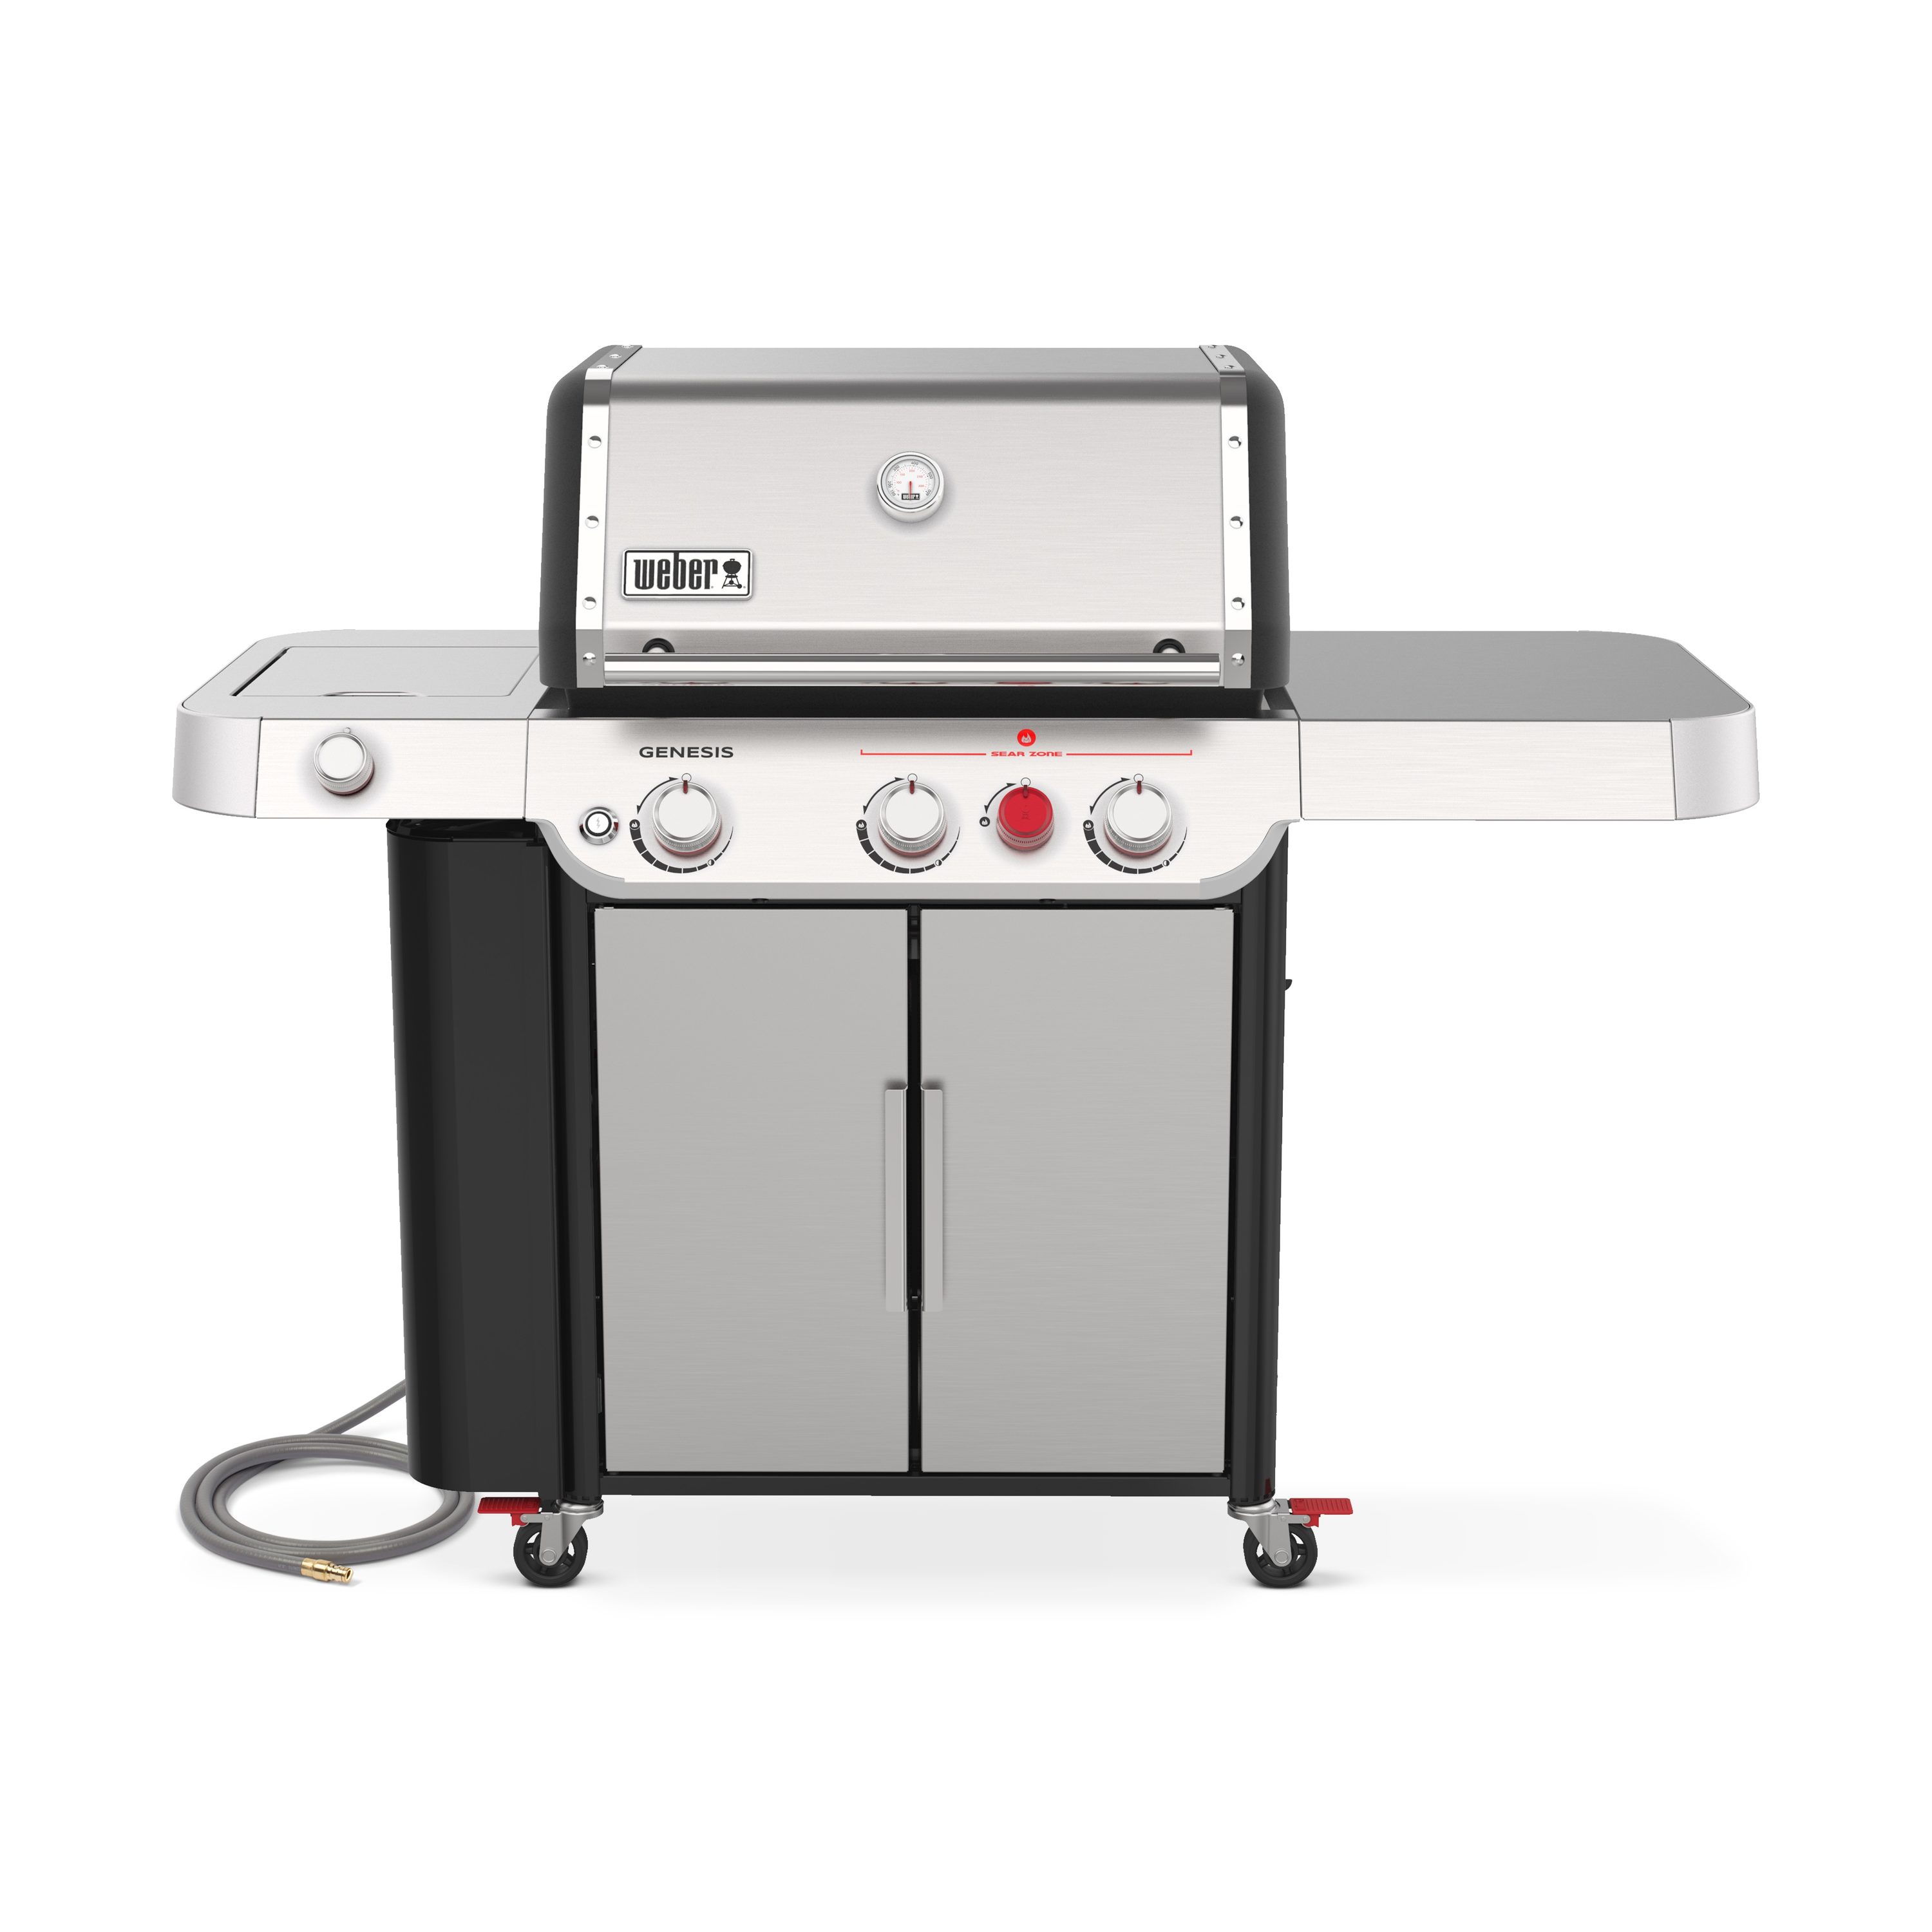 Weber Genesis S-335 Stainless Steel 3-Burner Natural Gas Grill with 1 Side Burner in Gas Grills at Lowes.com